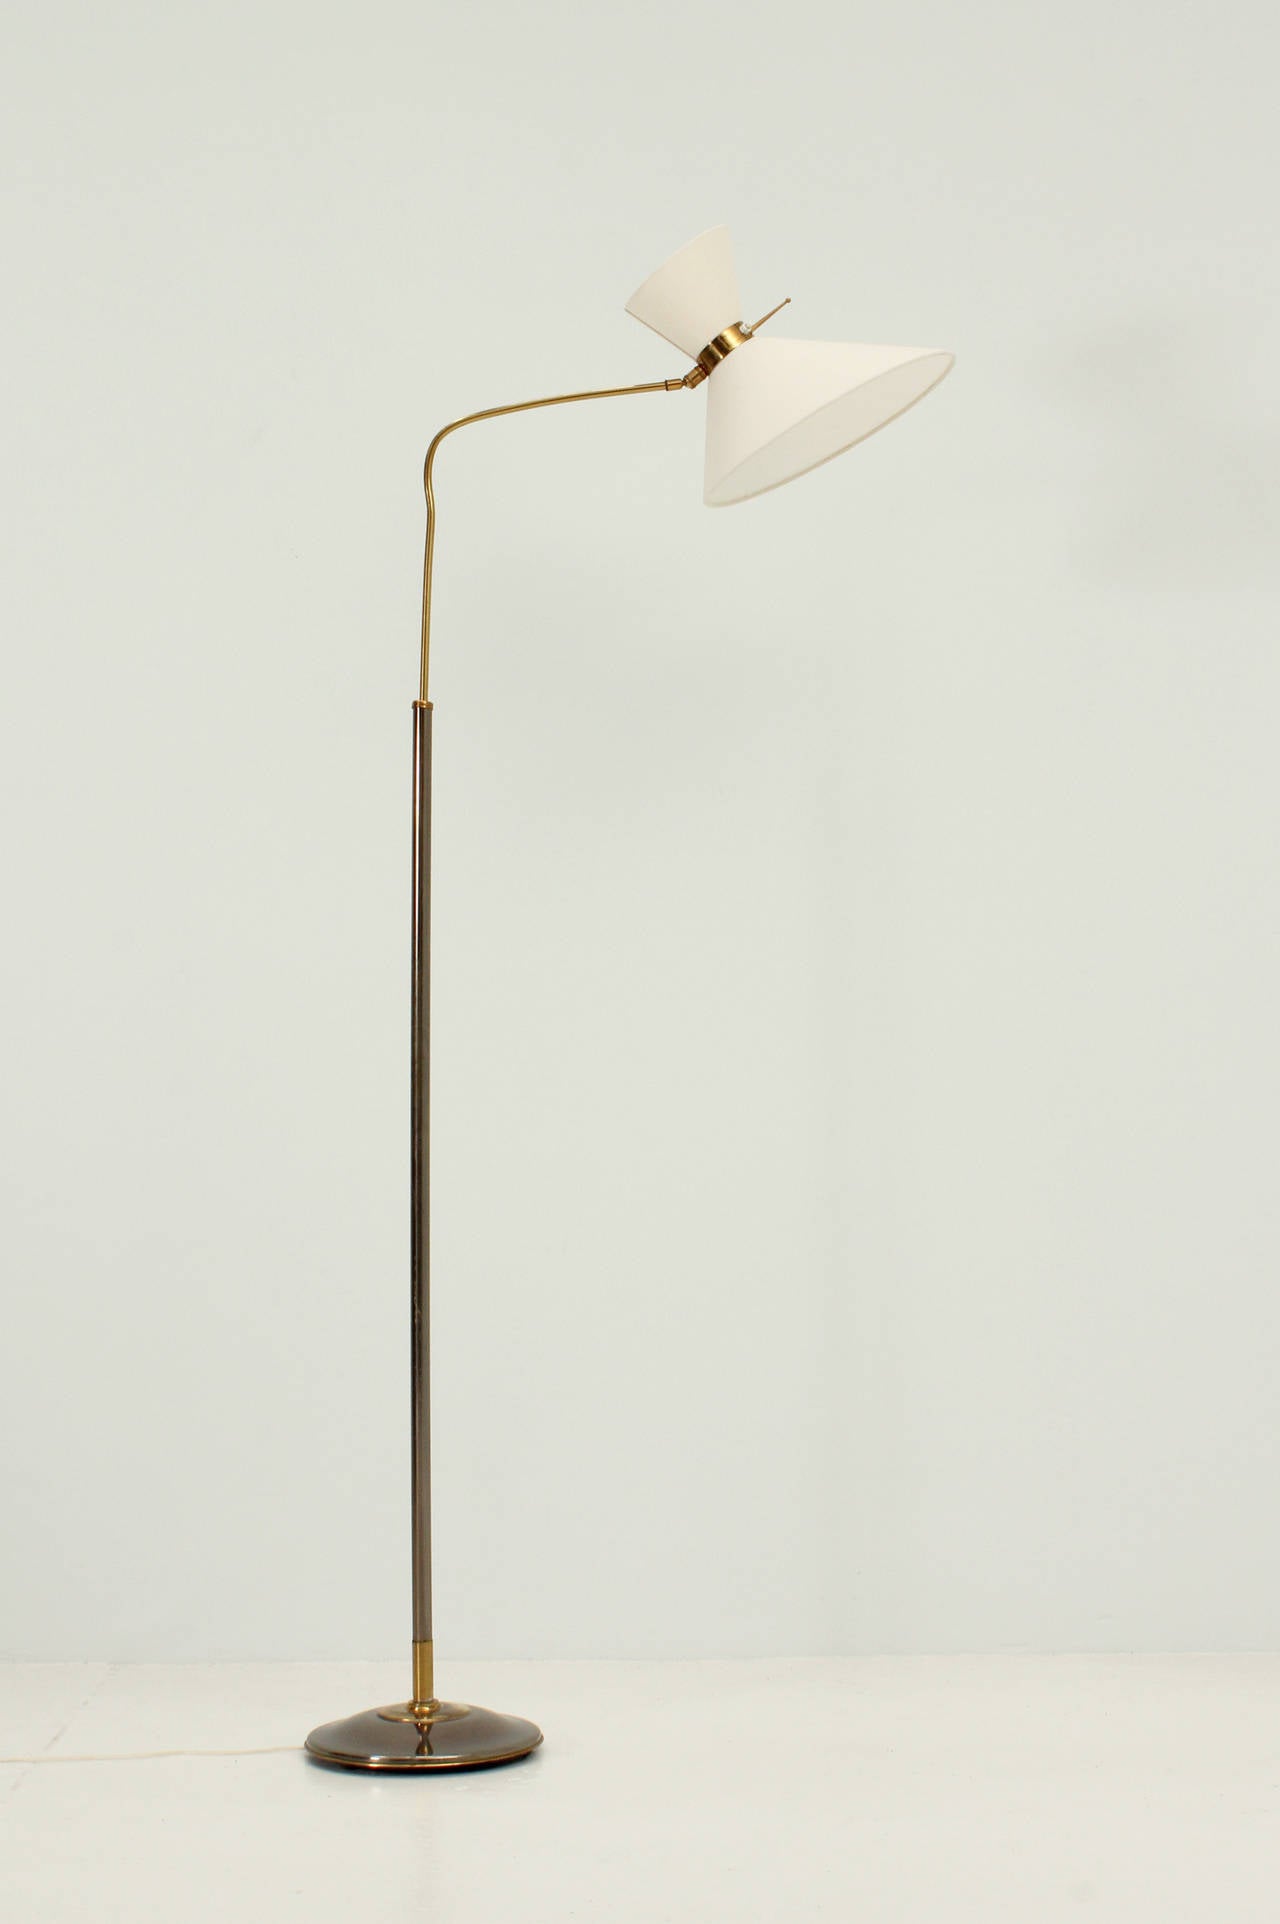 Floor lamp by Lunel, France 1950s. Brass and bronze base with adjustable height arm and rotary double shade with new fabric.